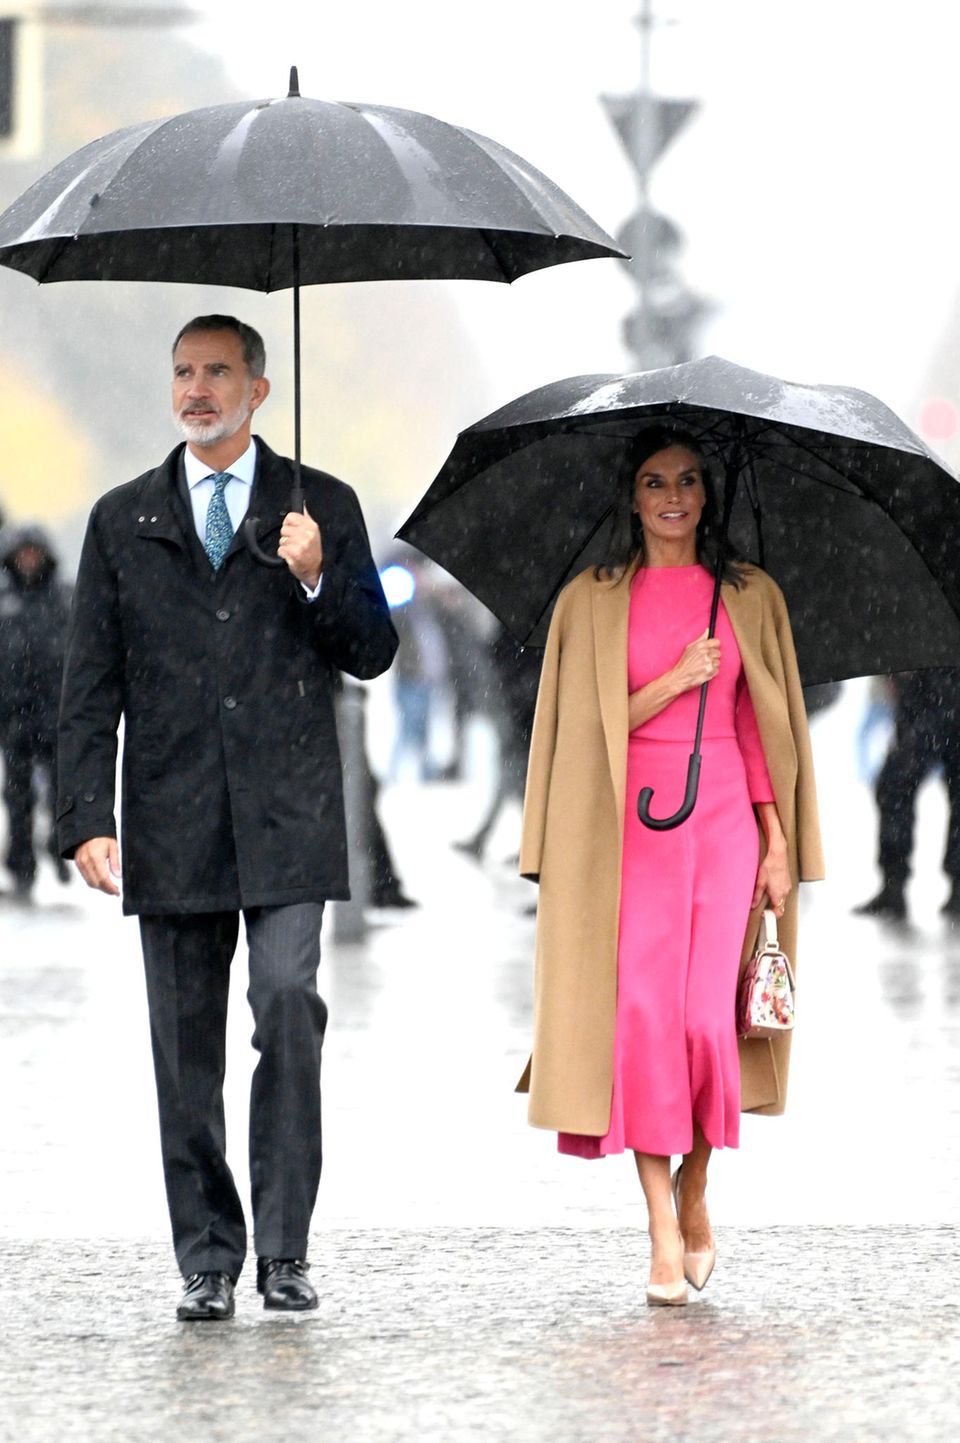 During her state visit to Germany, Queen Letizia wears a coat by Carolina Herrera and a fuchsia dress by Moisés Nieto. 